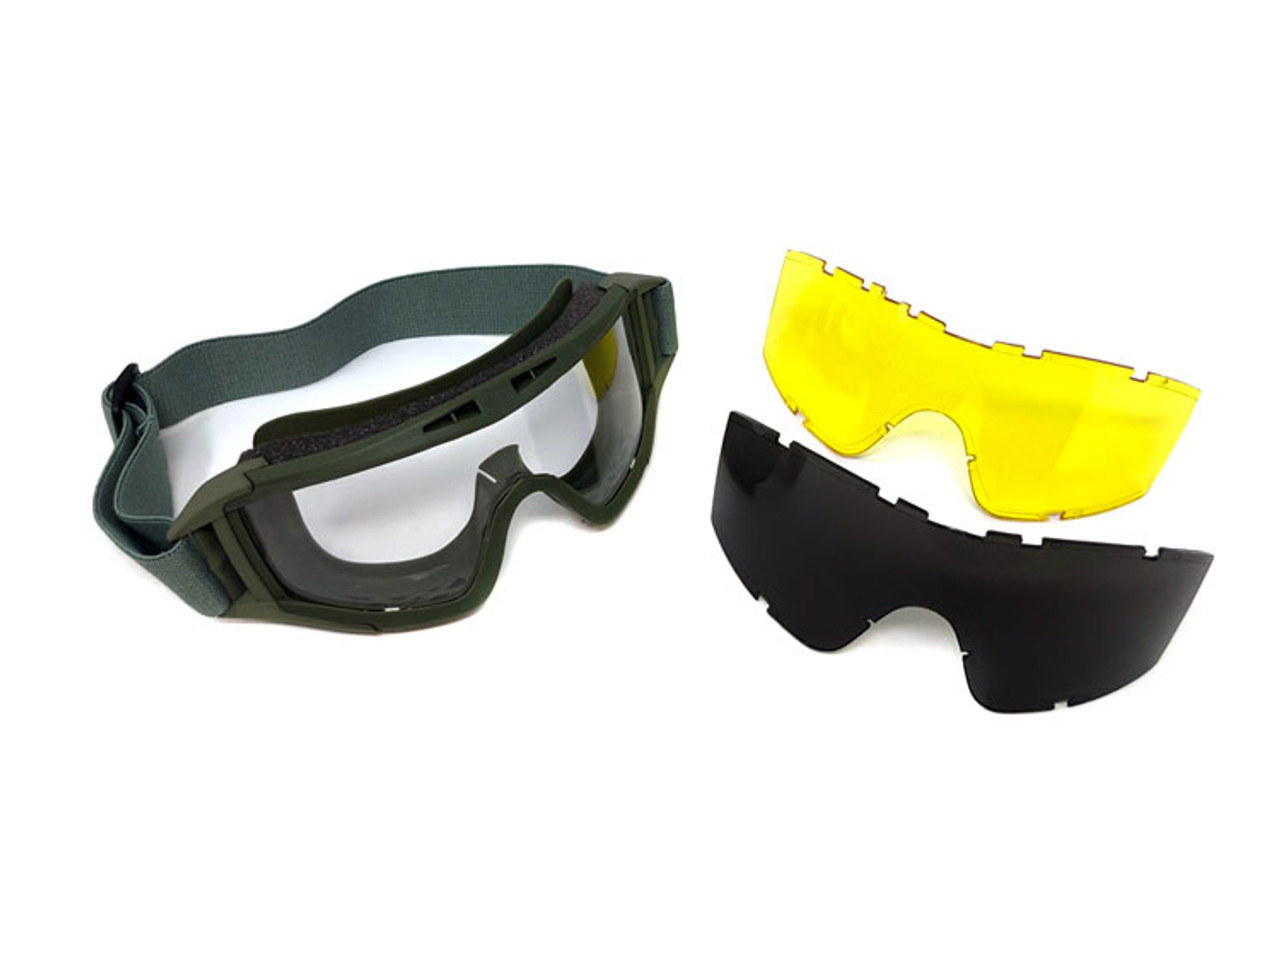 MYK Military style goggles - Includes Free extra SMOKE Shield & Free extra high visibility (yellow)